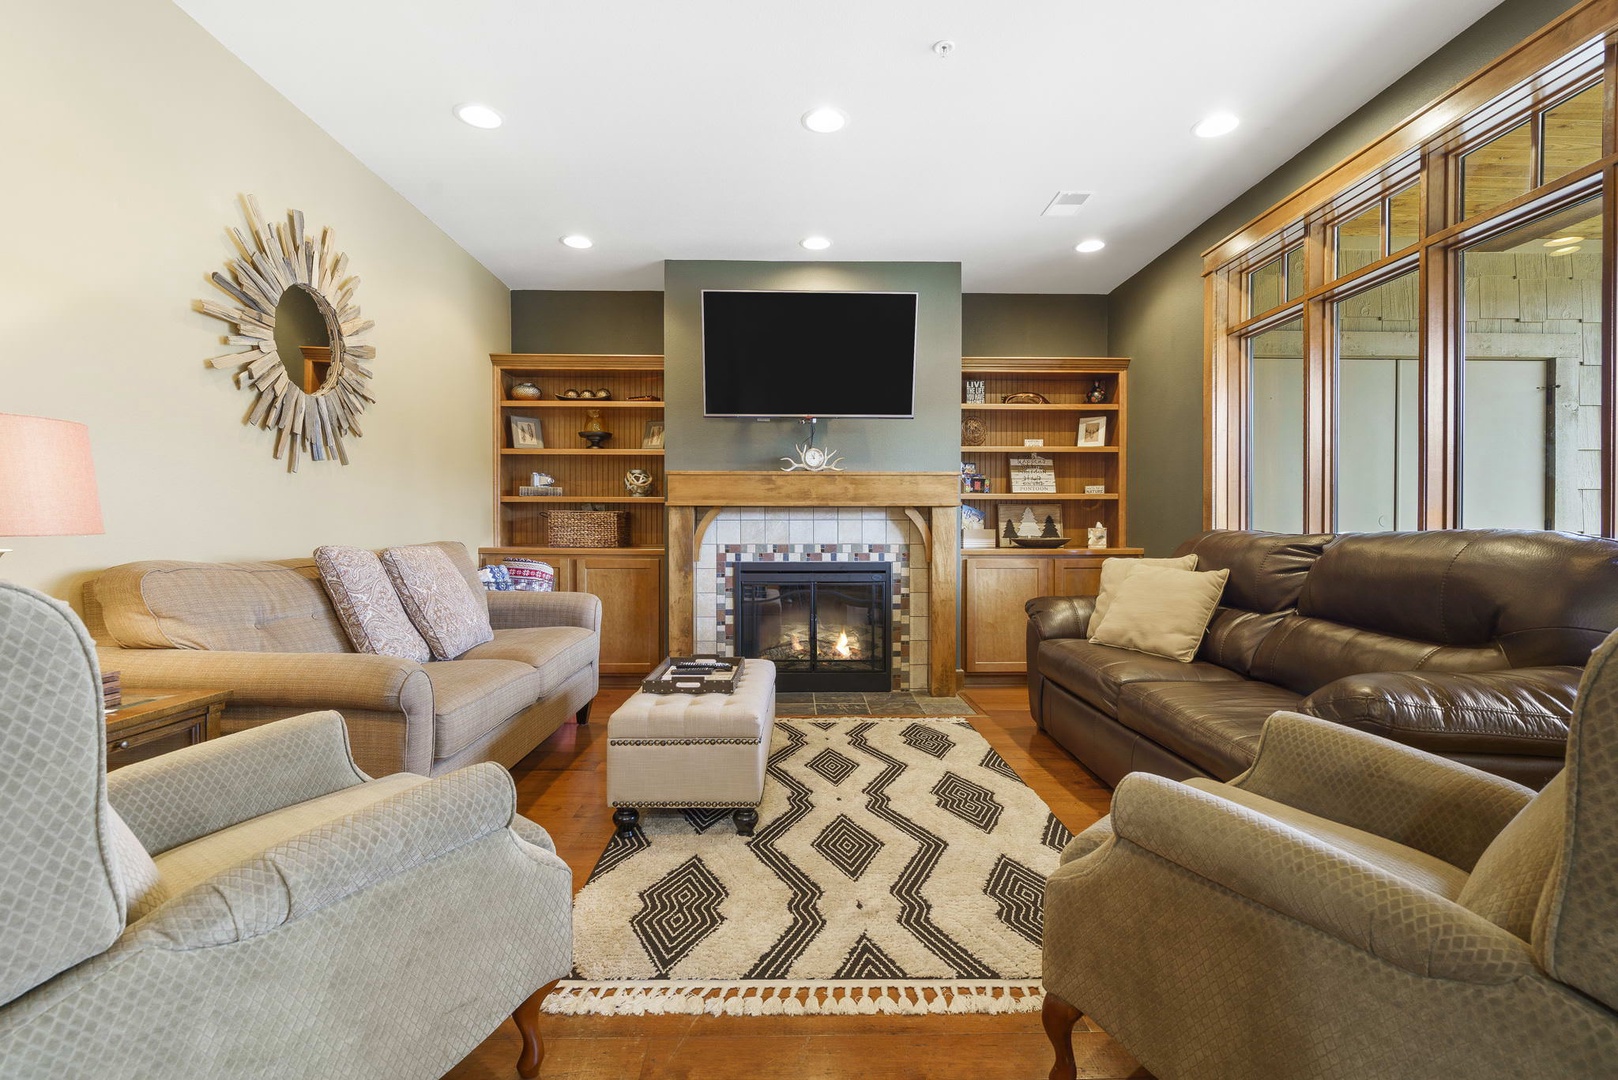 Open living space with sofa sleeper, TV, and fireplace